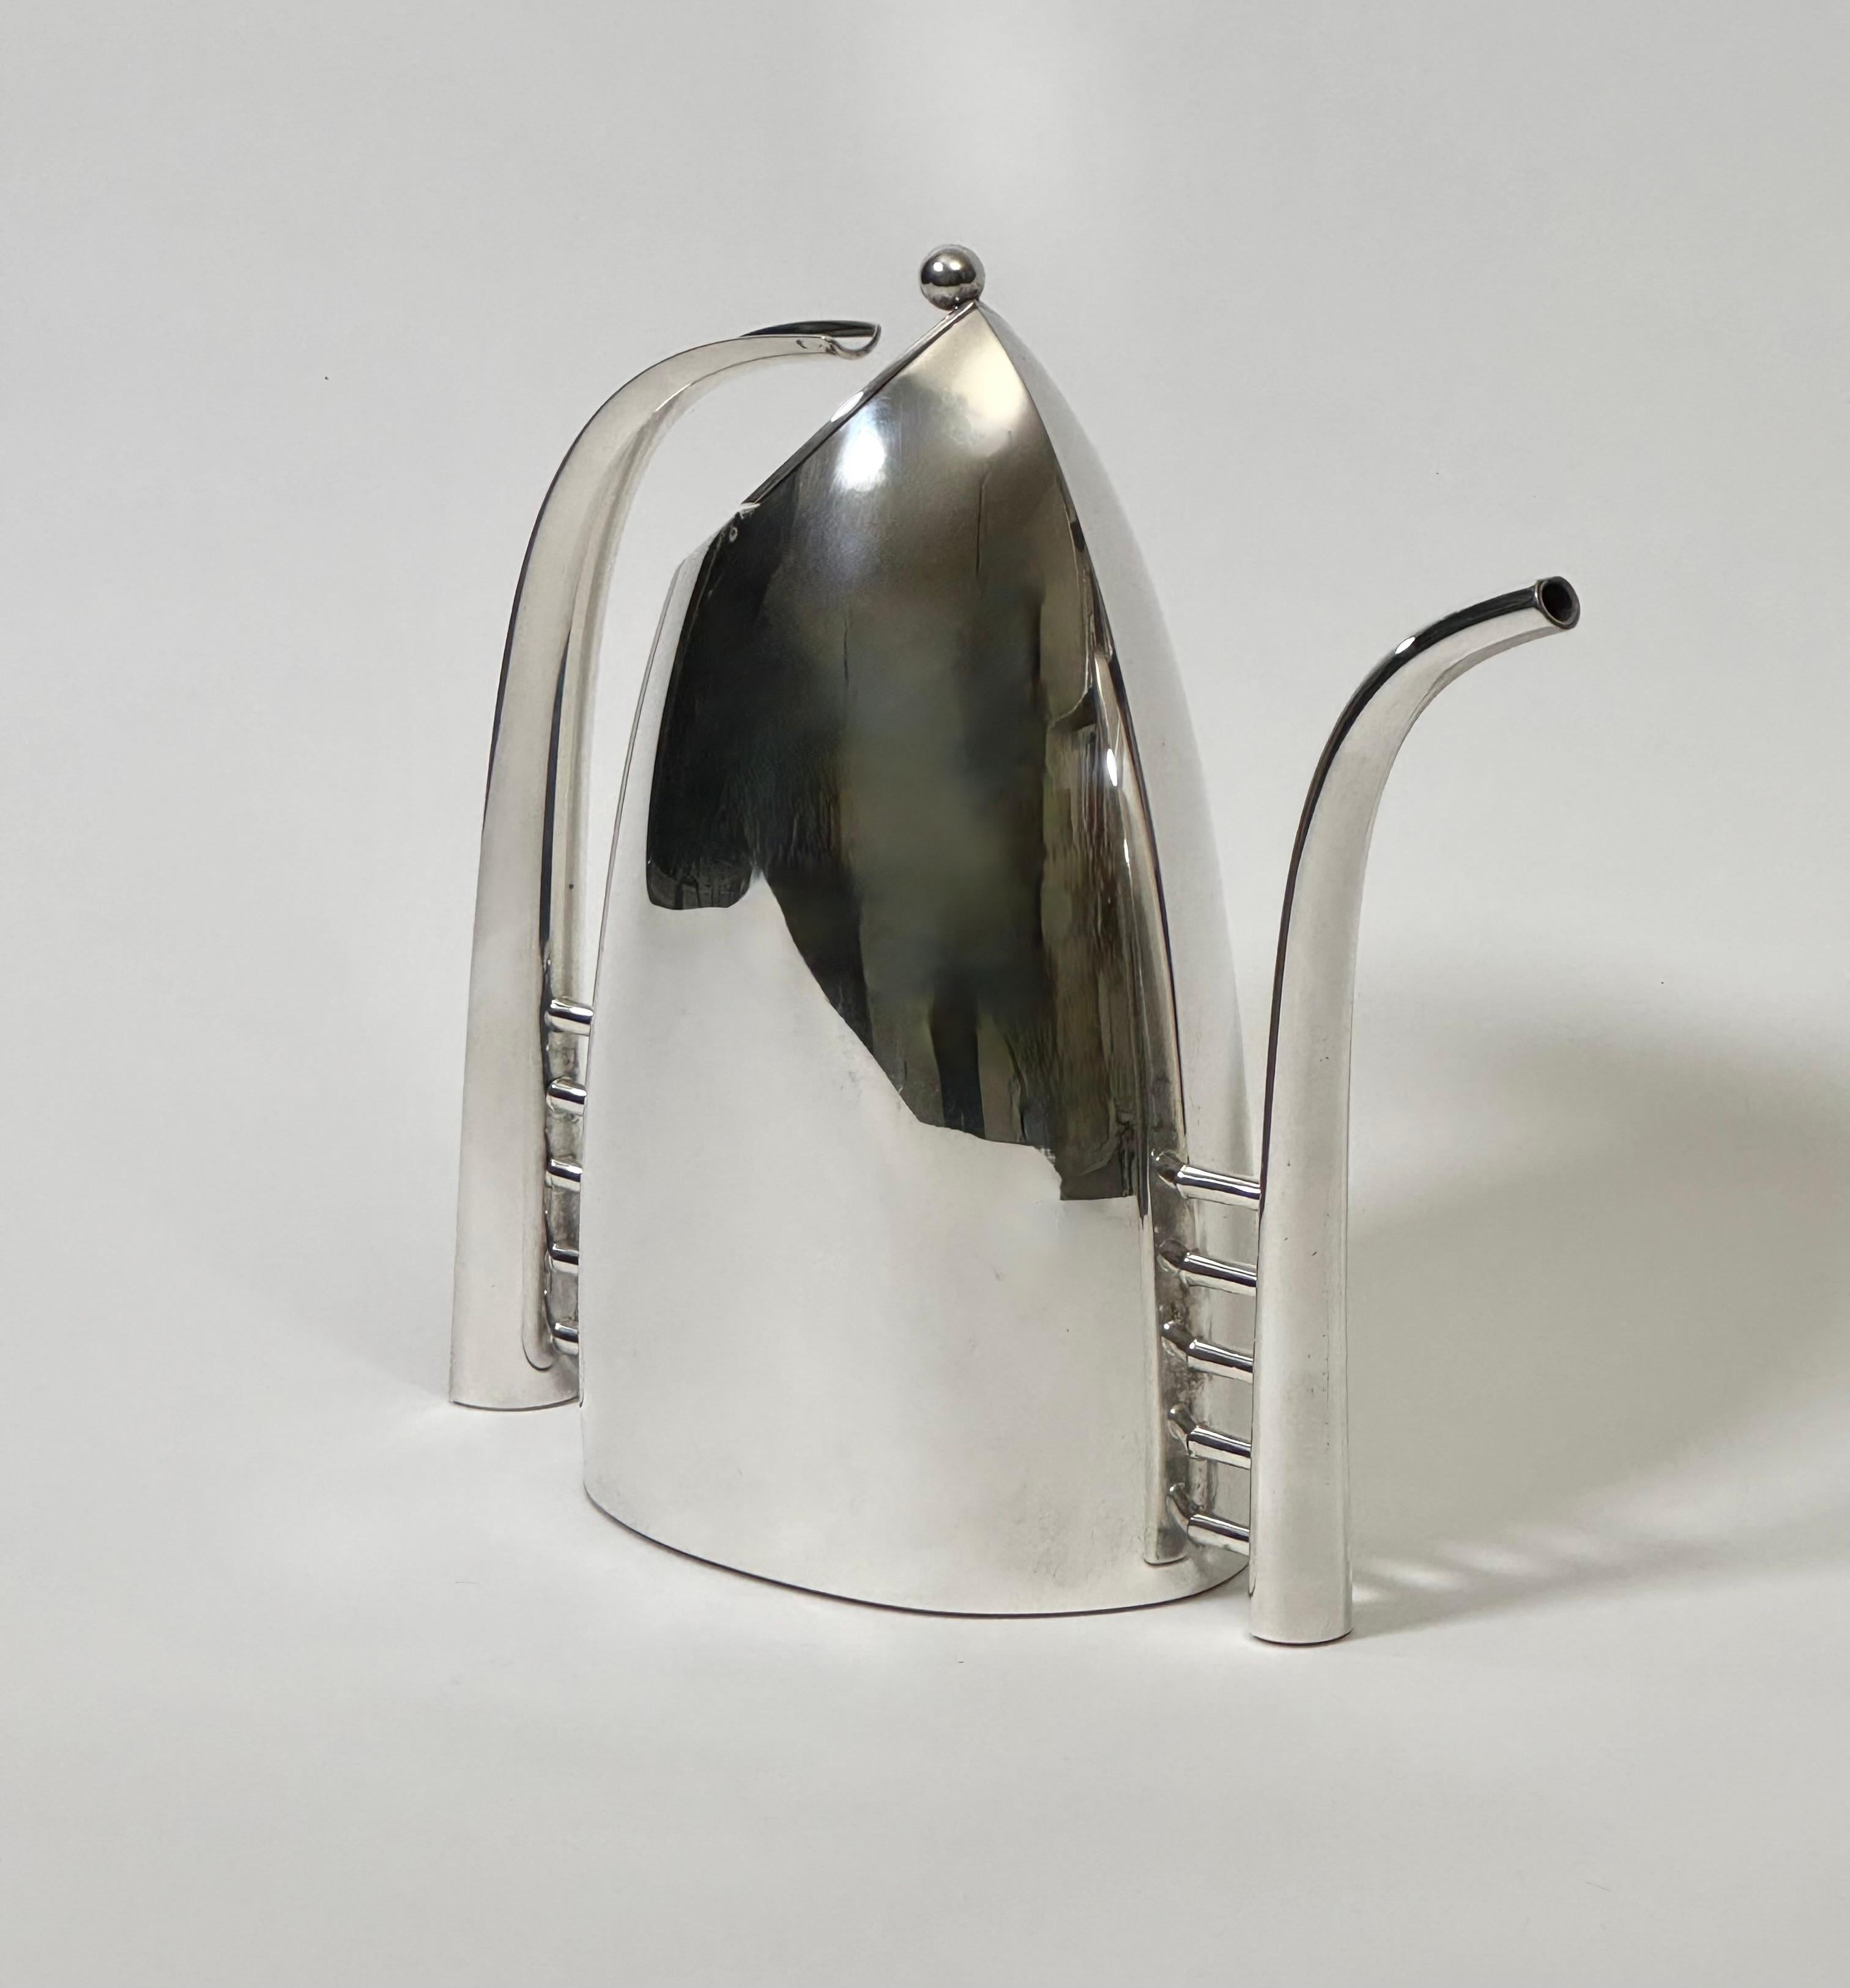 Silver plated coffee pot by Italian designer Lino Sabatini for his 